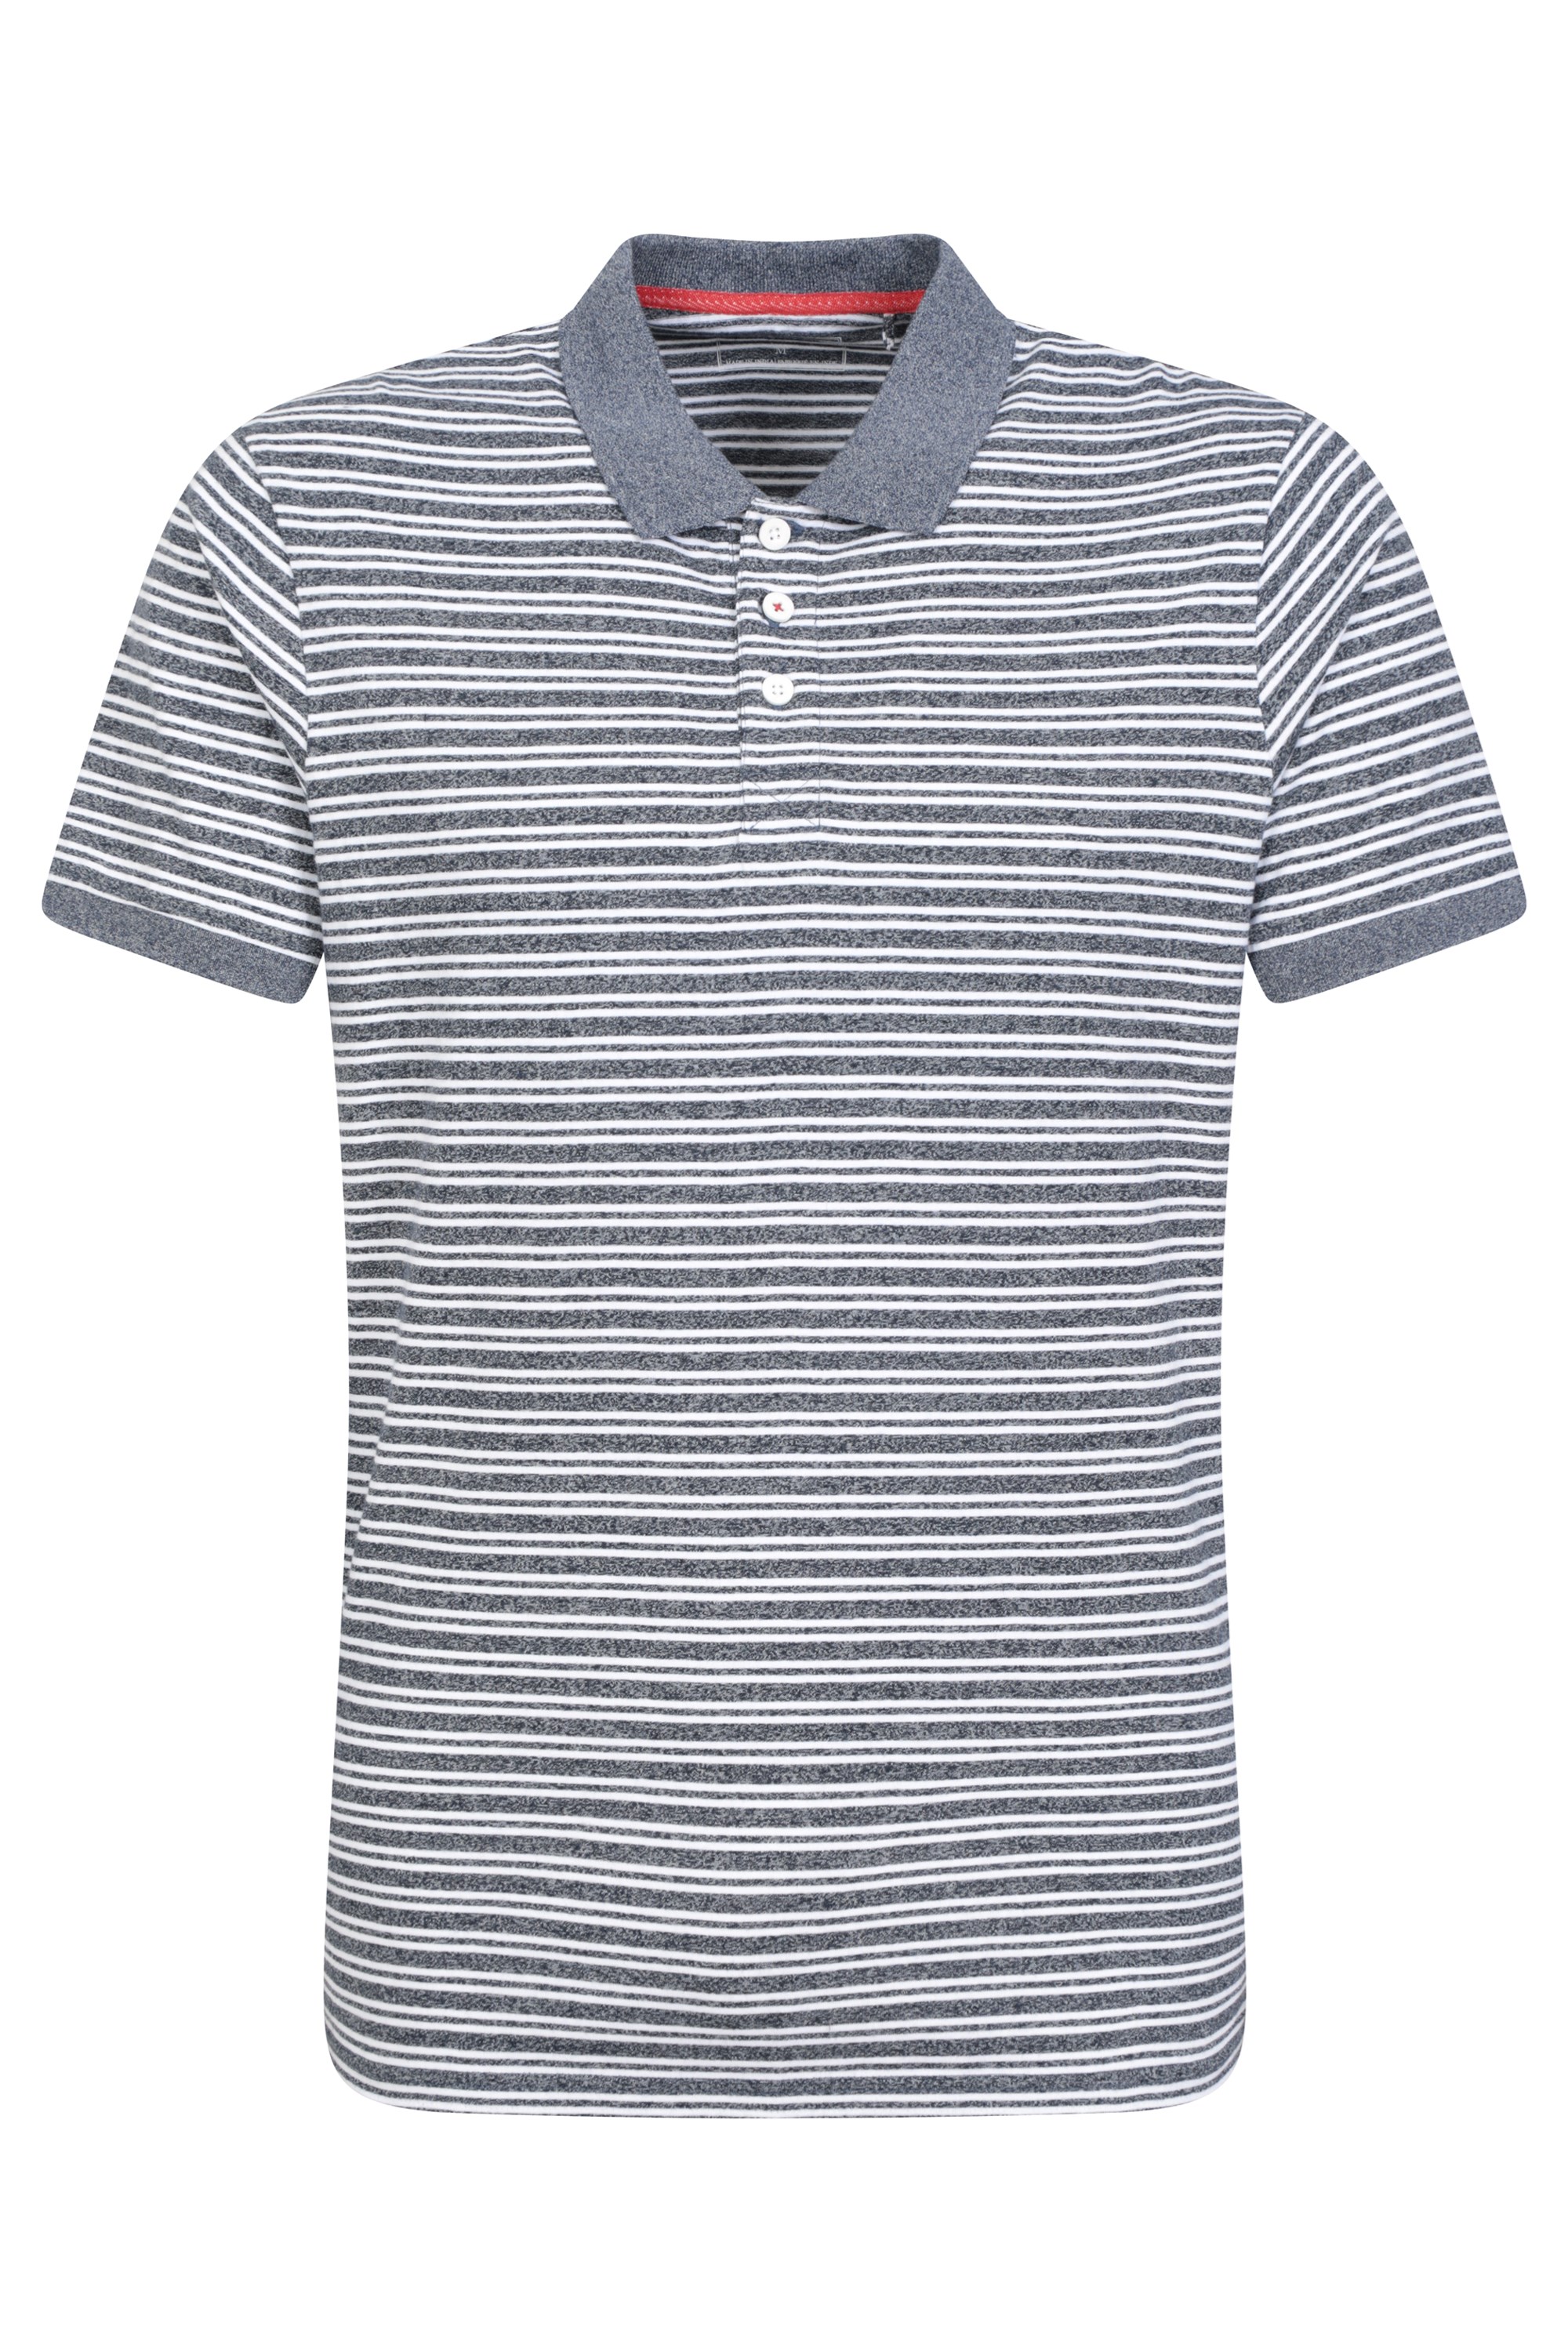 Scouller Mens Striped Polo Shirt - Grey